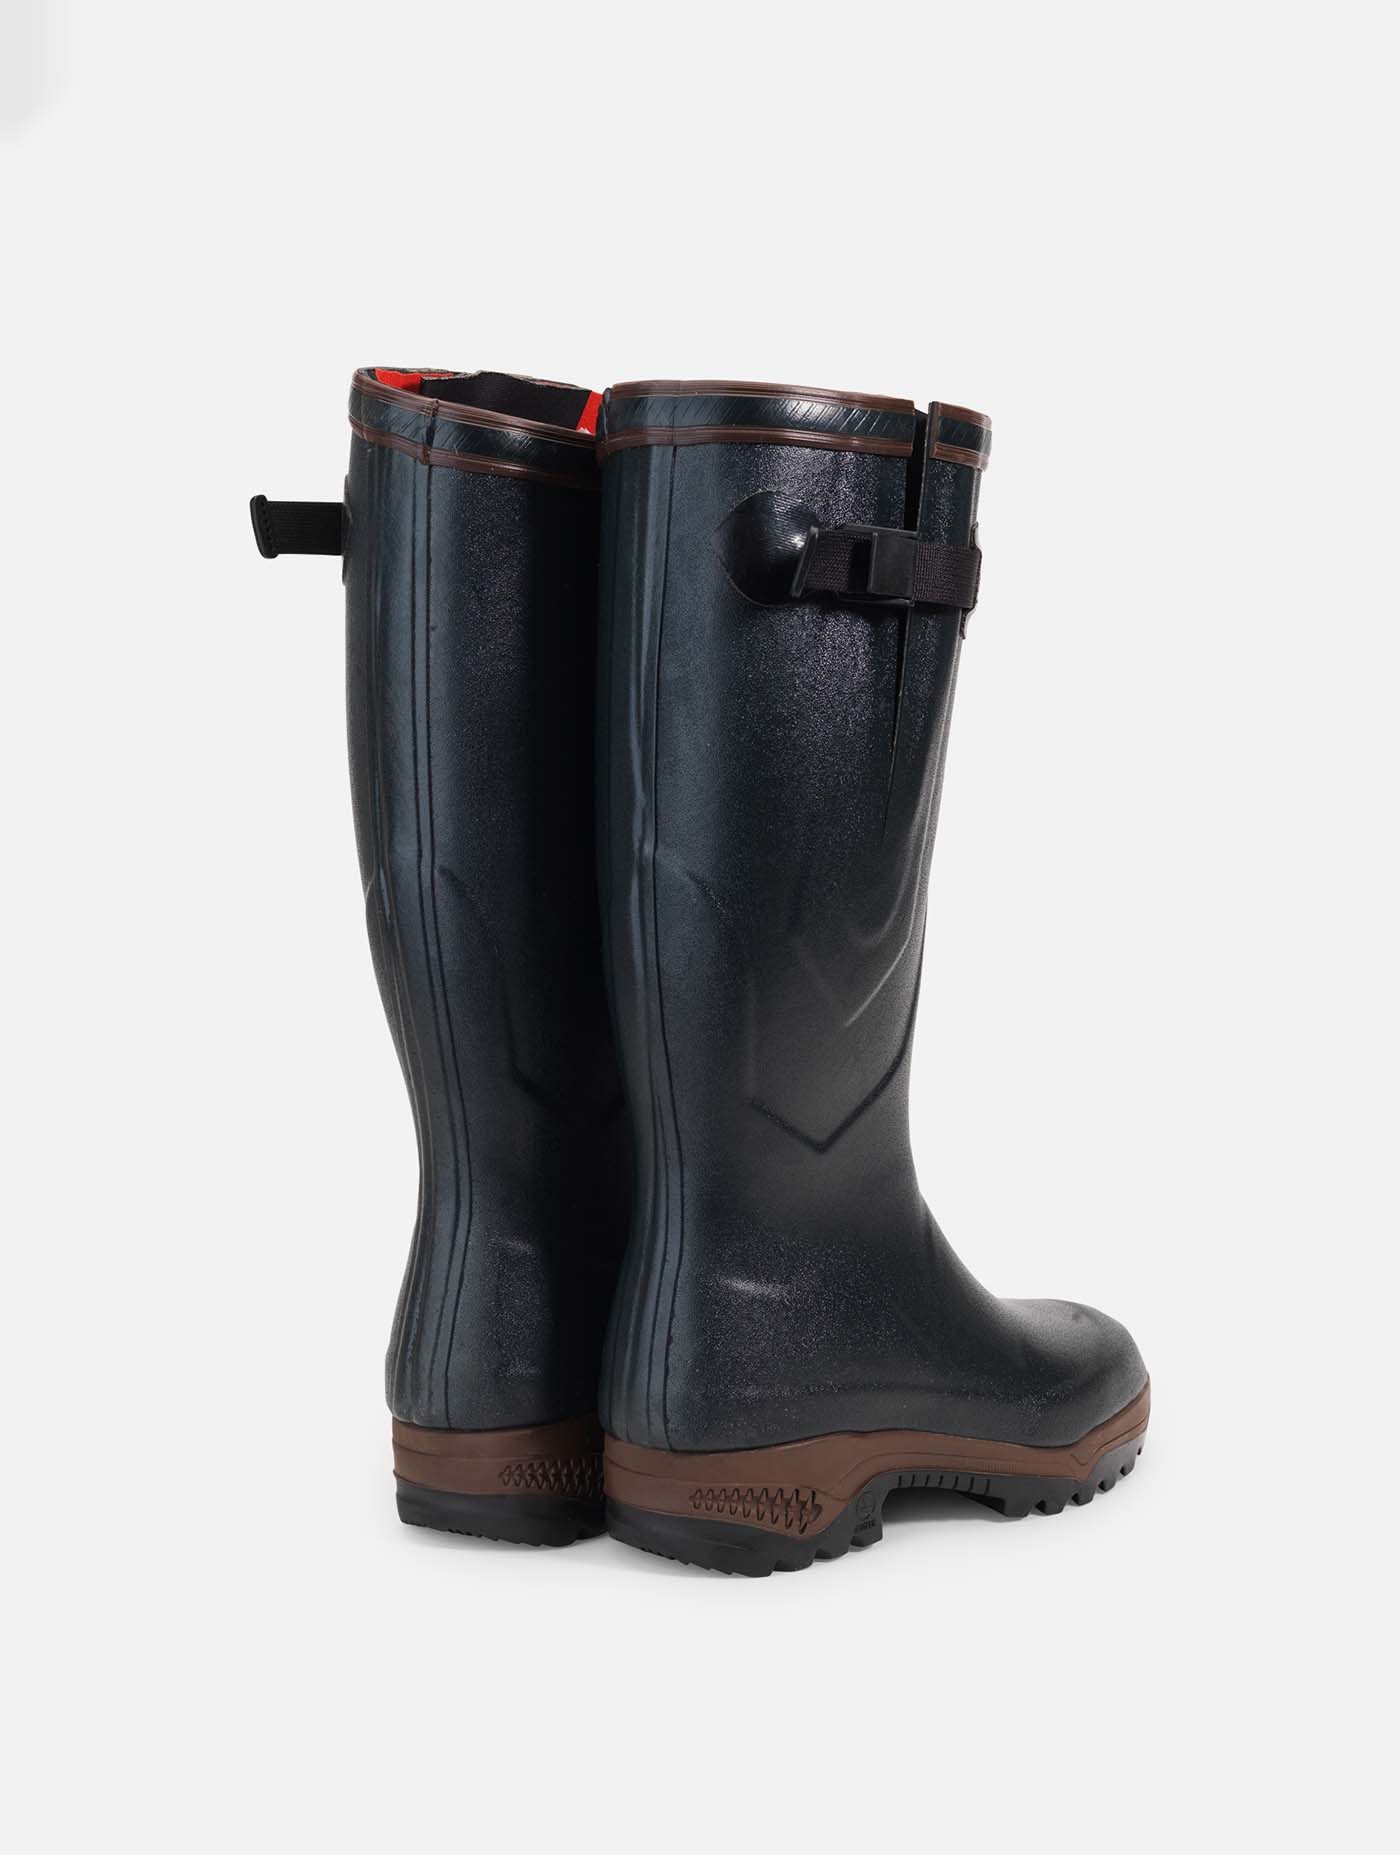 Hen imod subtraktion inaktive Aigle - Anti-fatigue boots for cold weather, Made in France Kaki - Parcours®  2 isomen | AIGLE